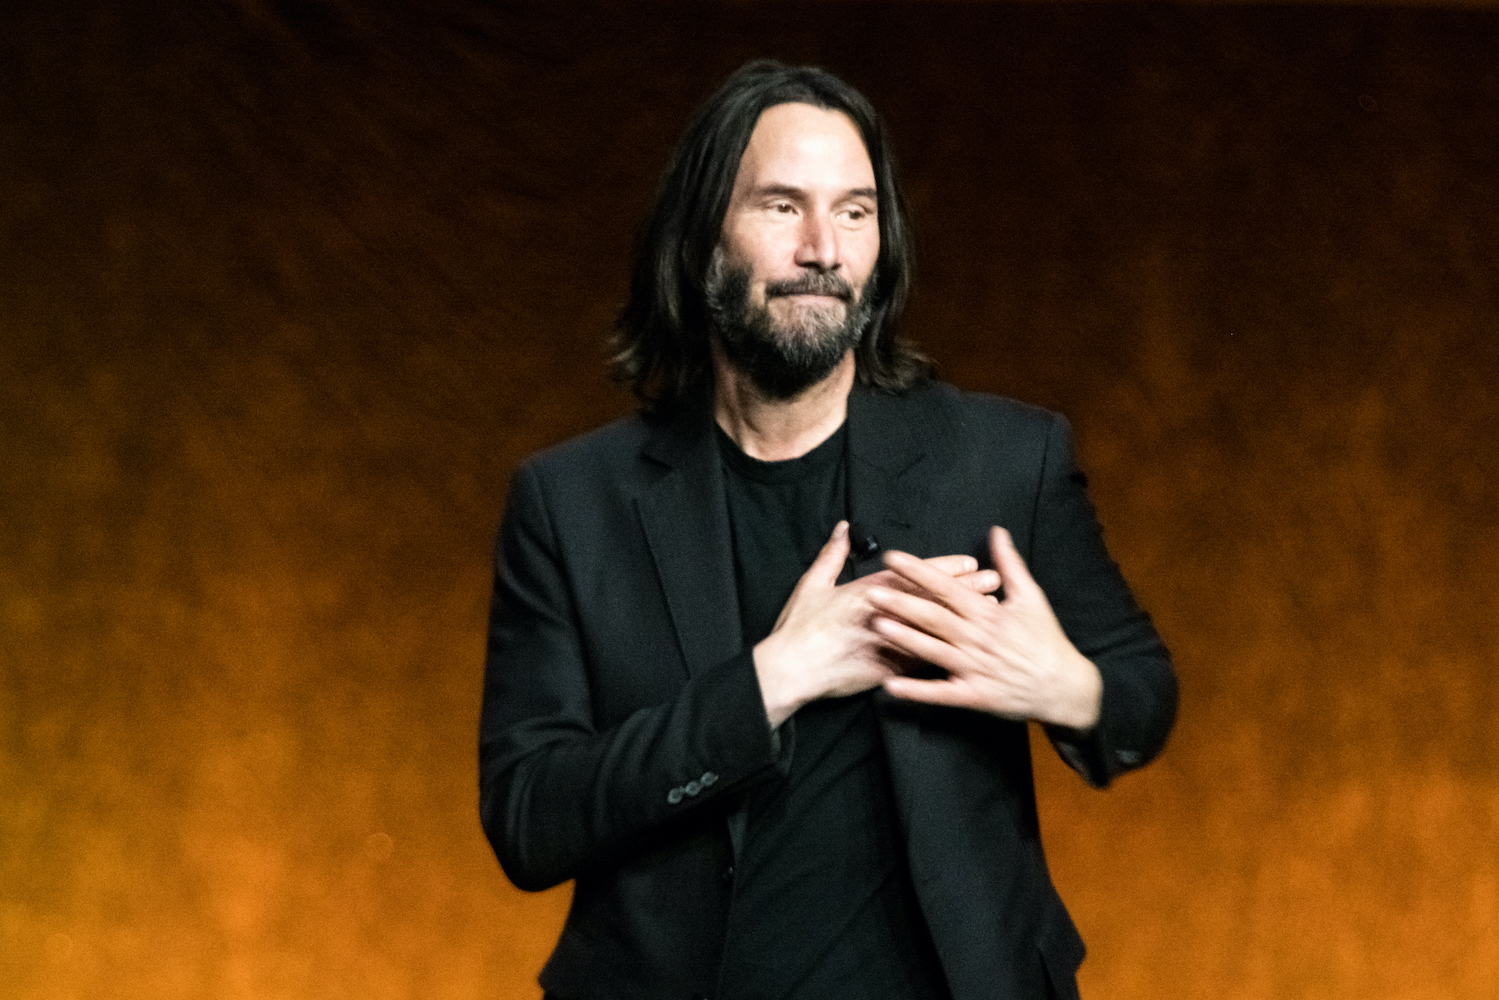 Keanu Reeves discusses the film John Wick: Chapter 4 at CinemaCon 2022